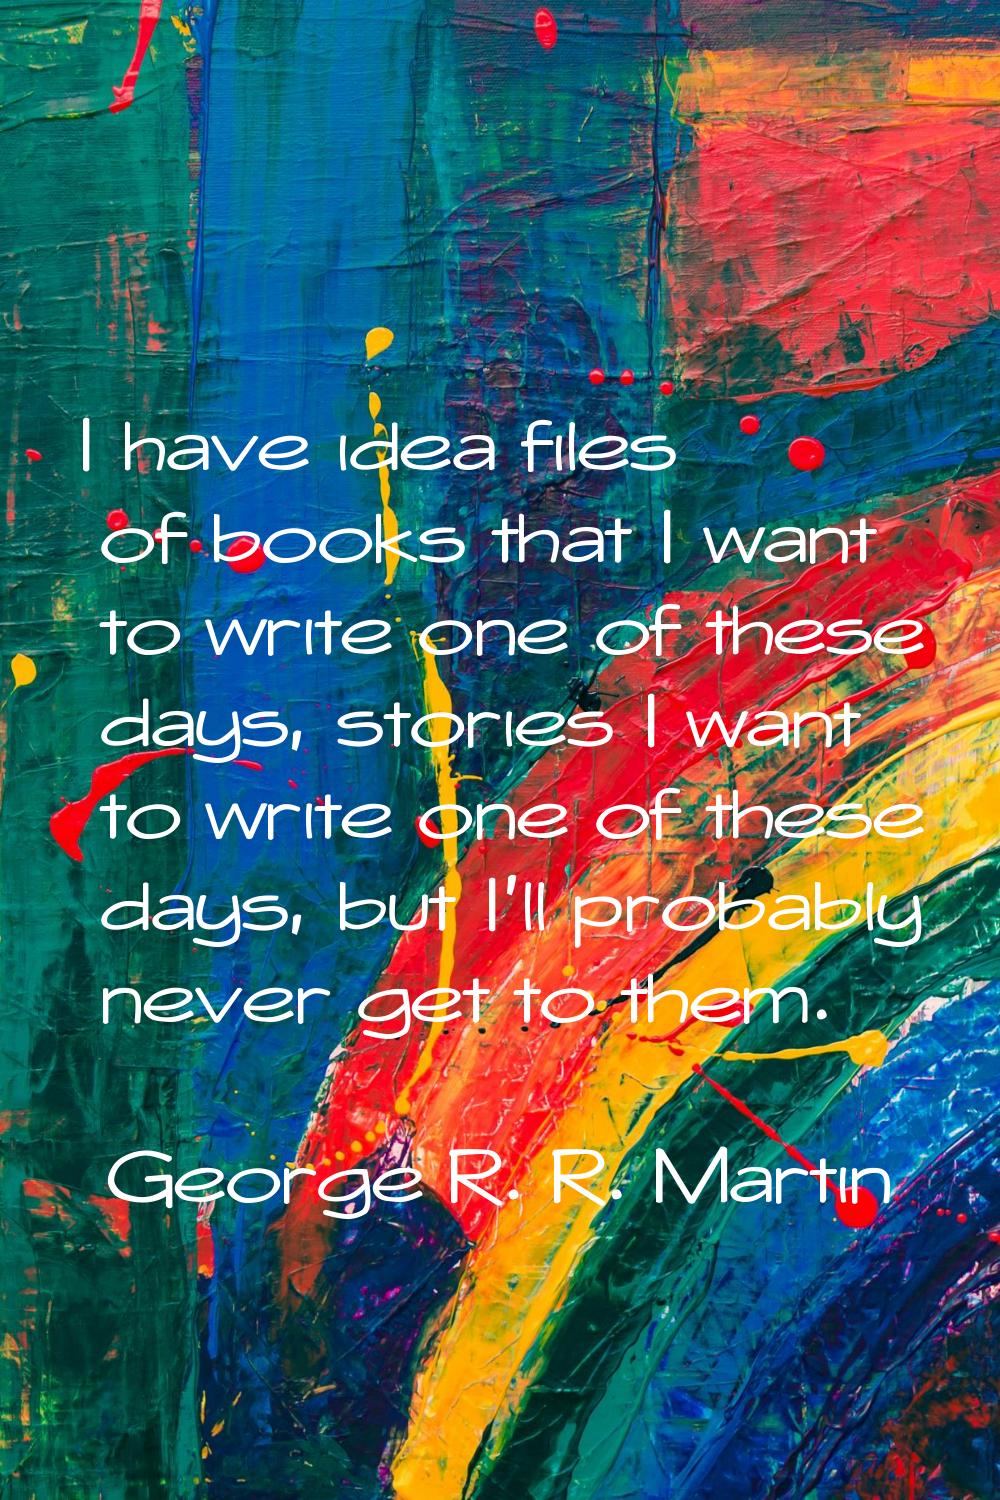 I have idea files of books that I want to write one of these days, stories I want to write one of t